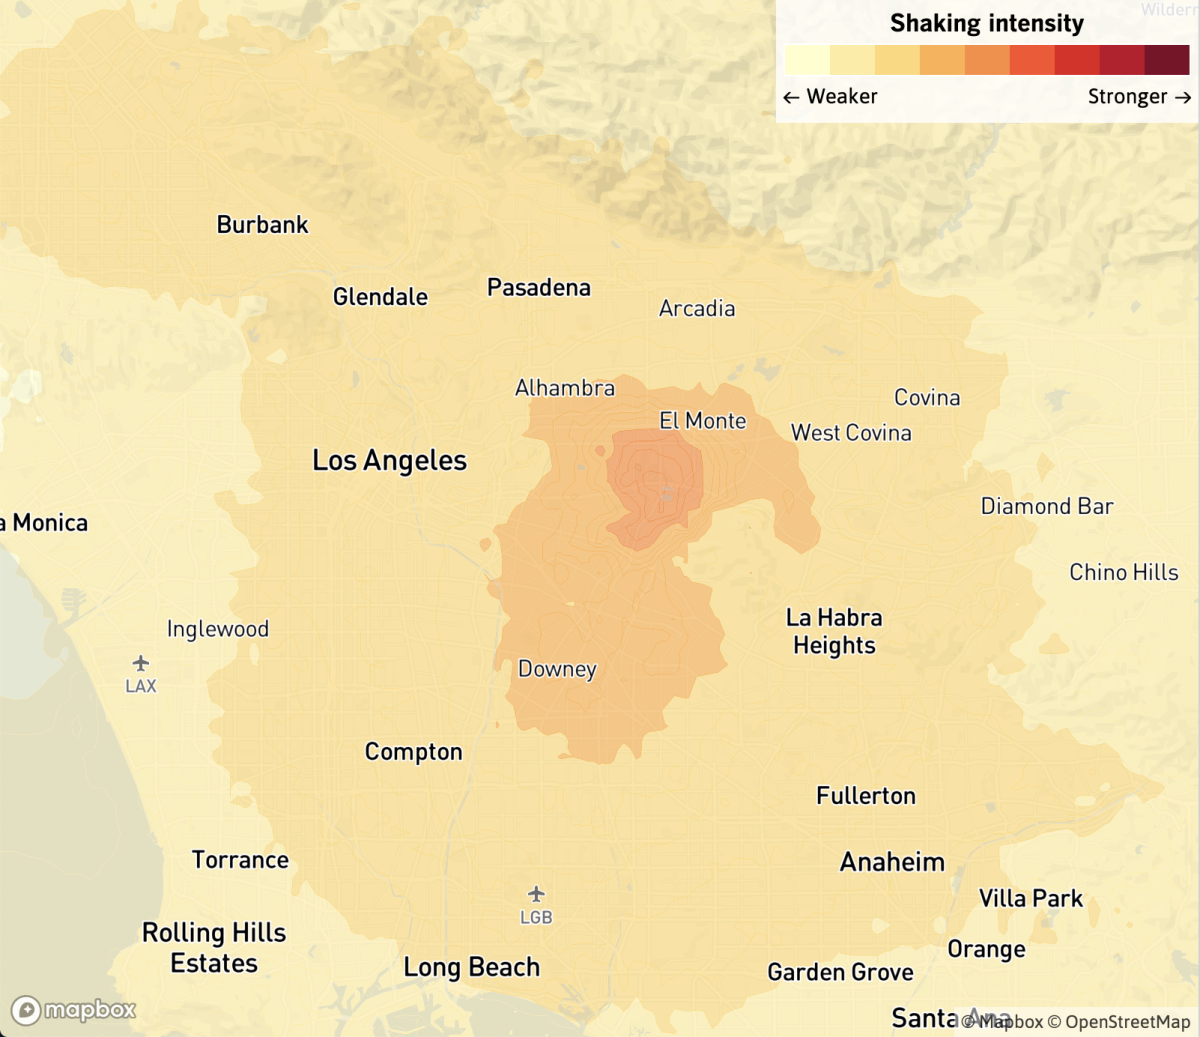 Map shows the location and shaking intensity of a magnitude 4.5 earthquake centered in Rosemead, Calif.